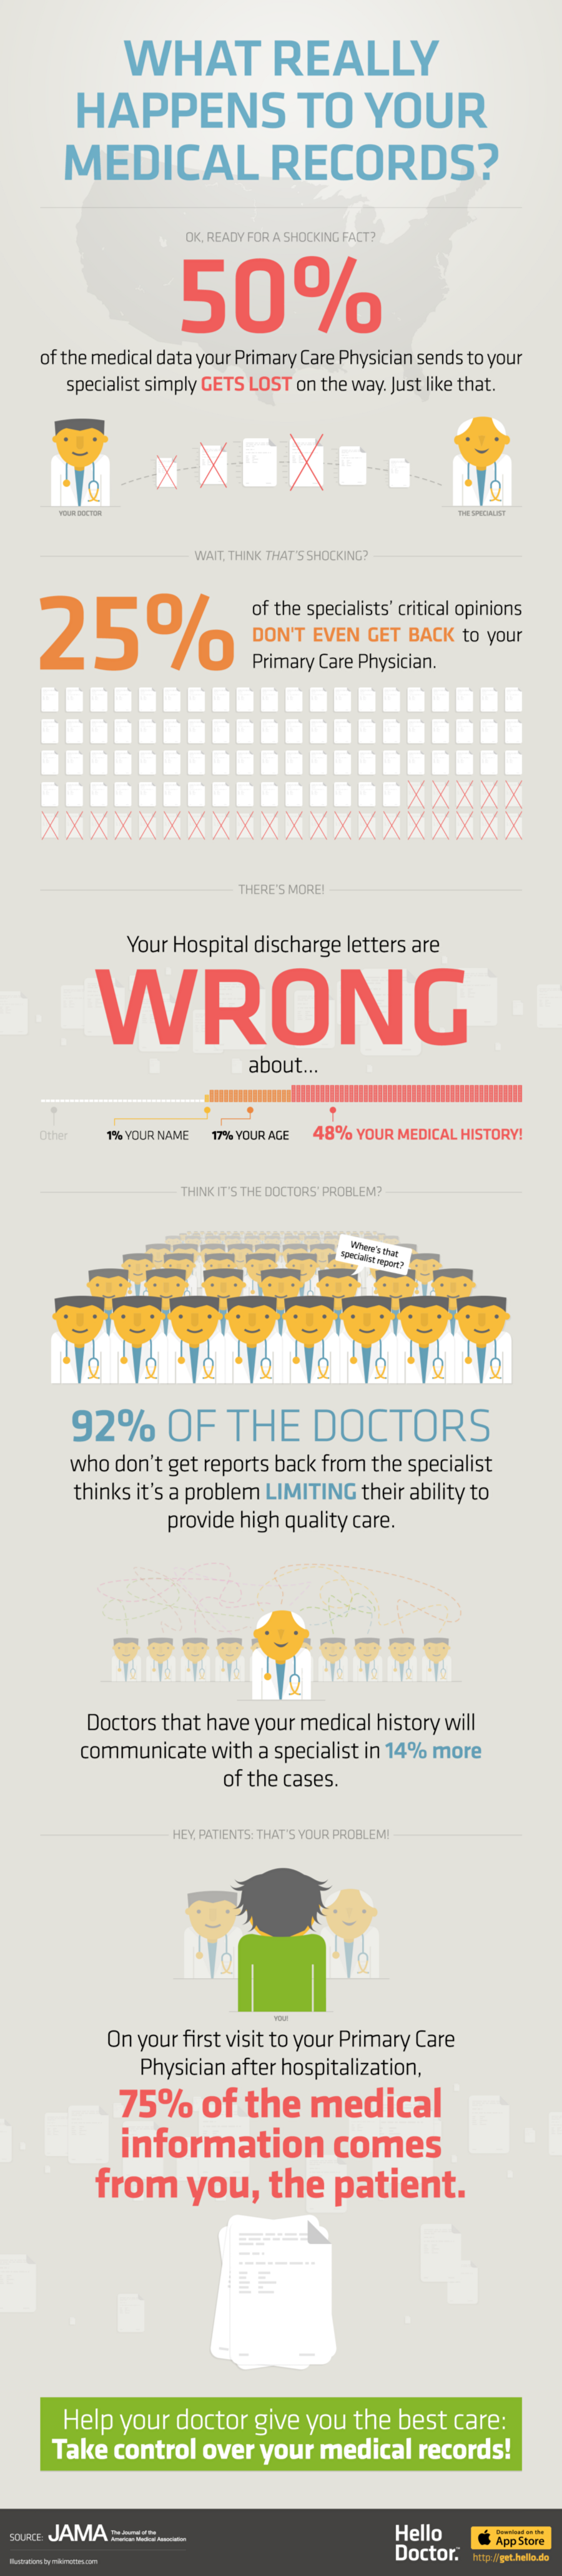 Infographic: What really happens to your medical records?